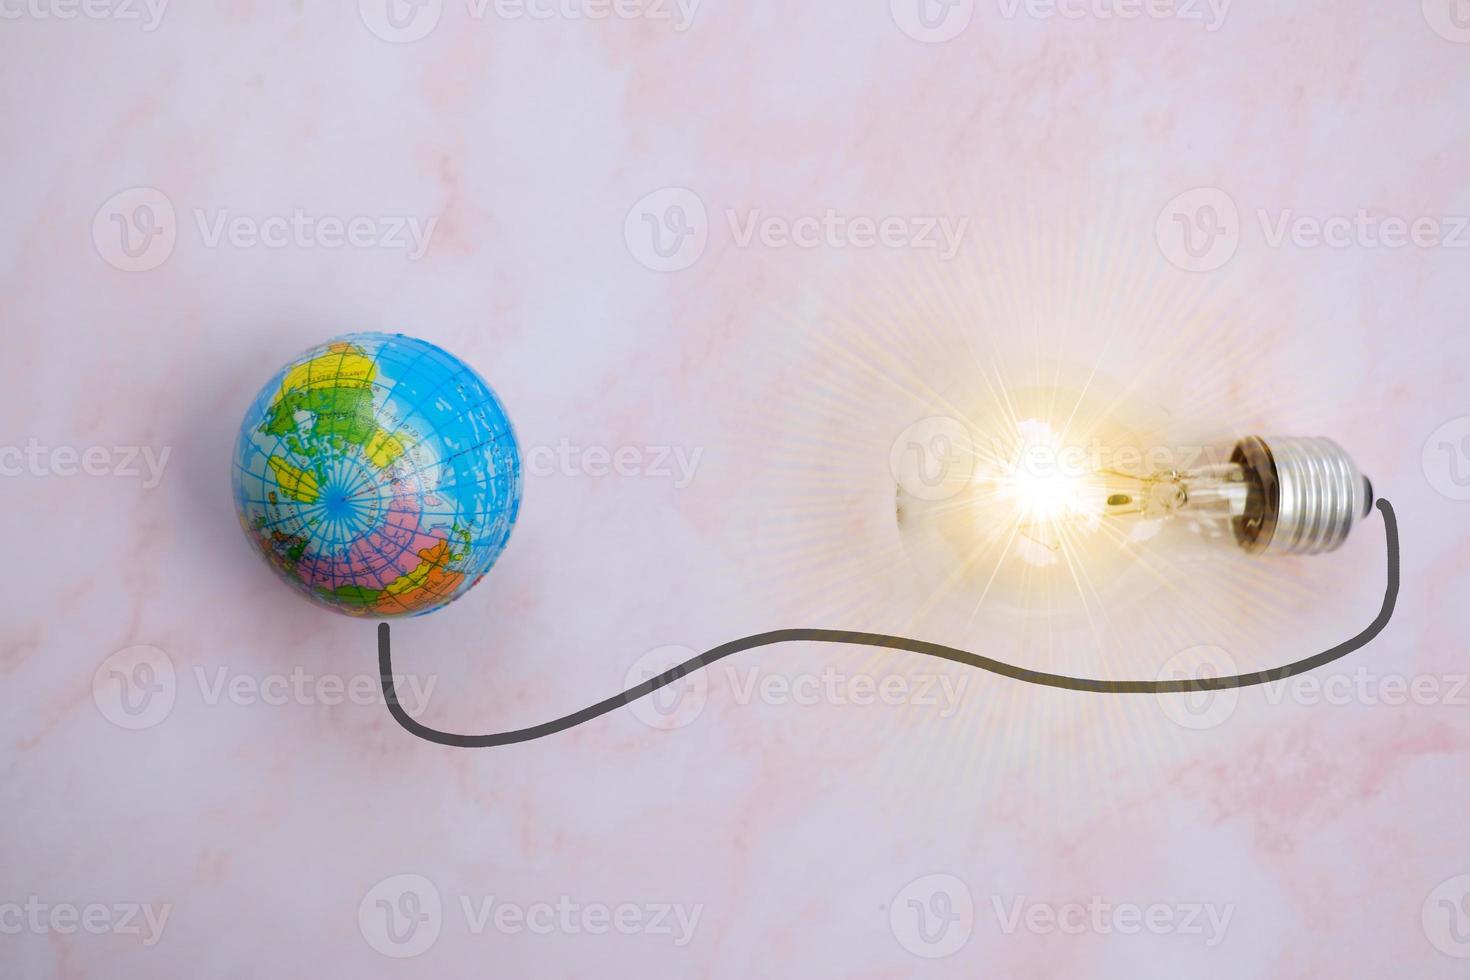 energy saving light bulb on table and business growth concept, new ideas innovation, brainstorming photo